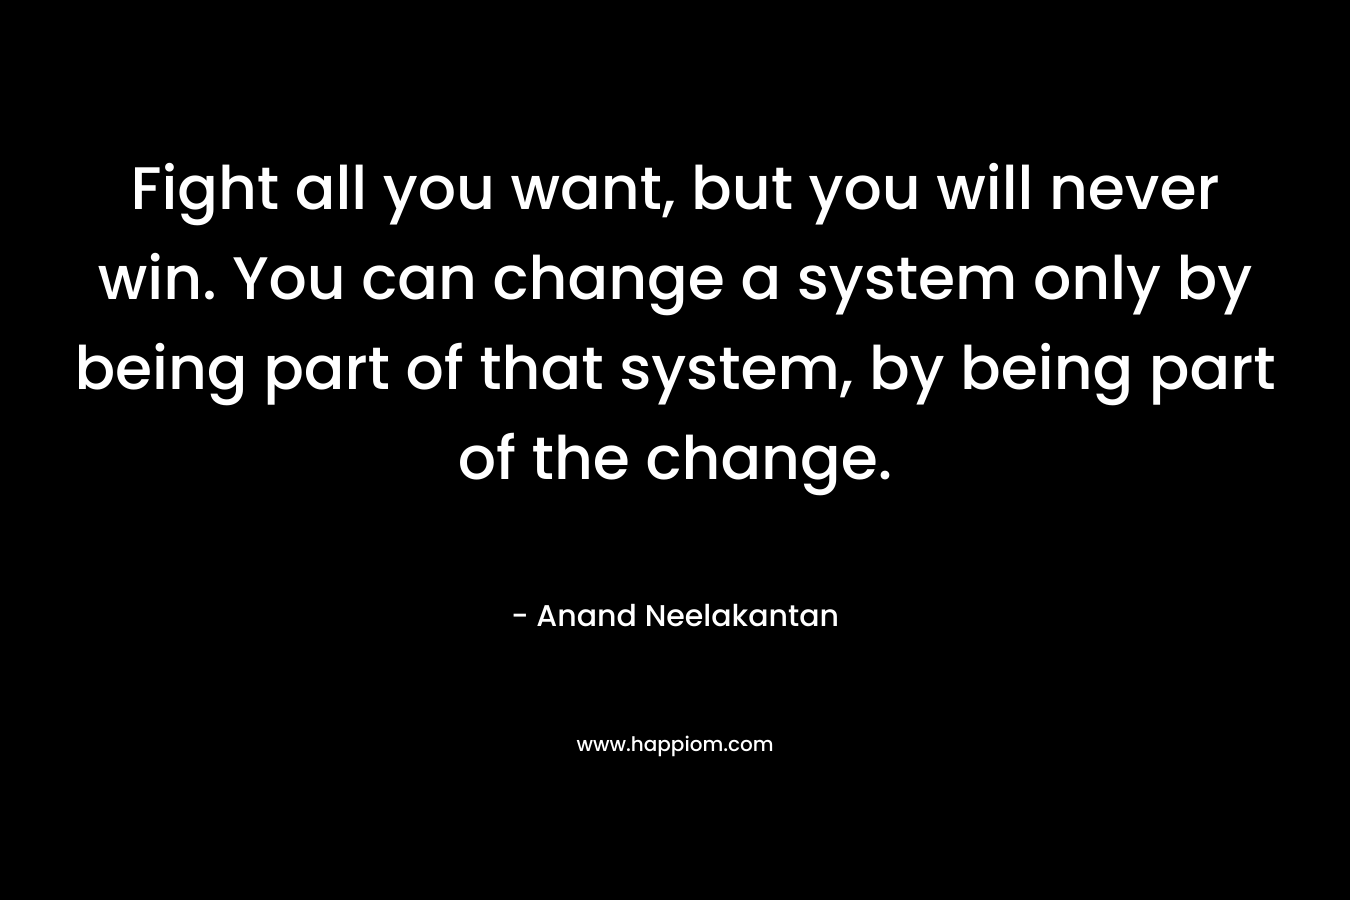 Fight all you want, but you will never win. You can change a system only by being part of that system, by being part of the change.